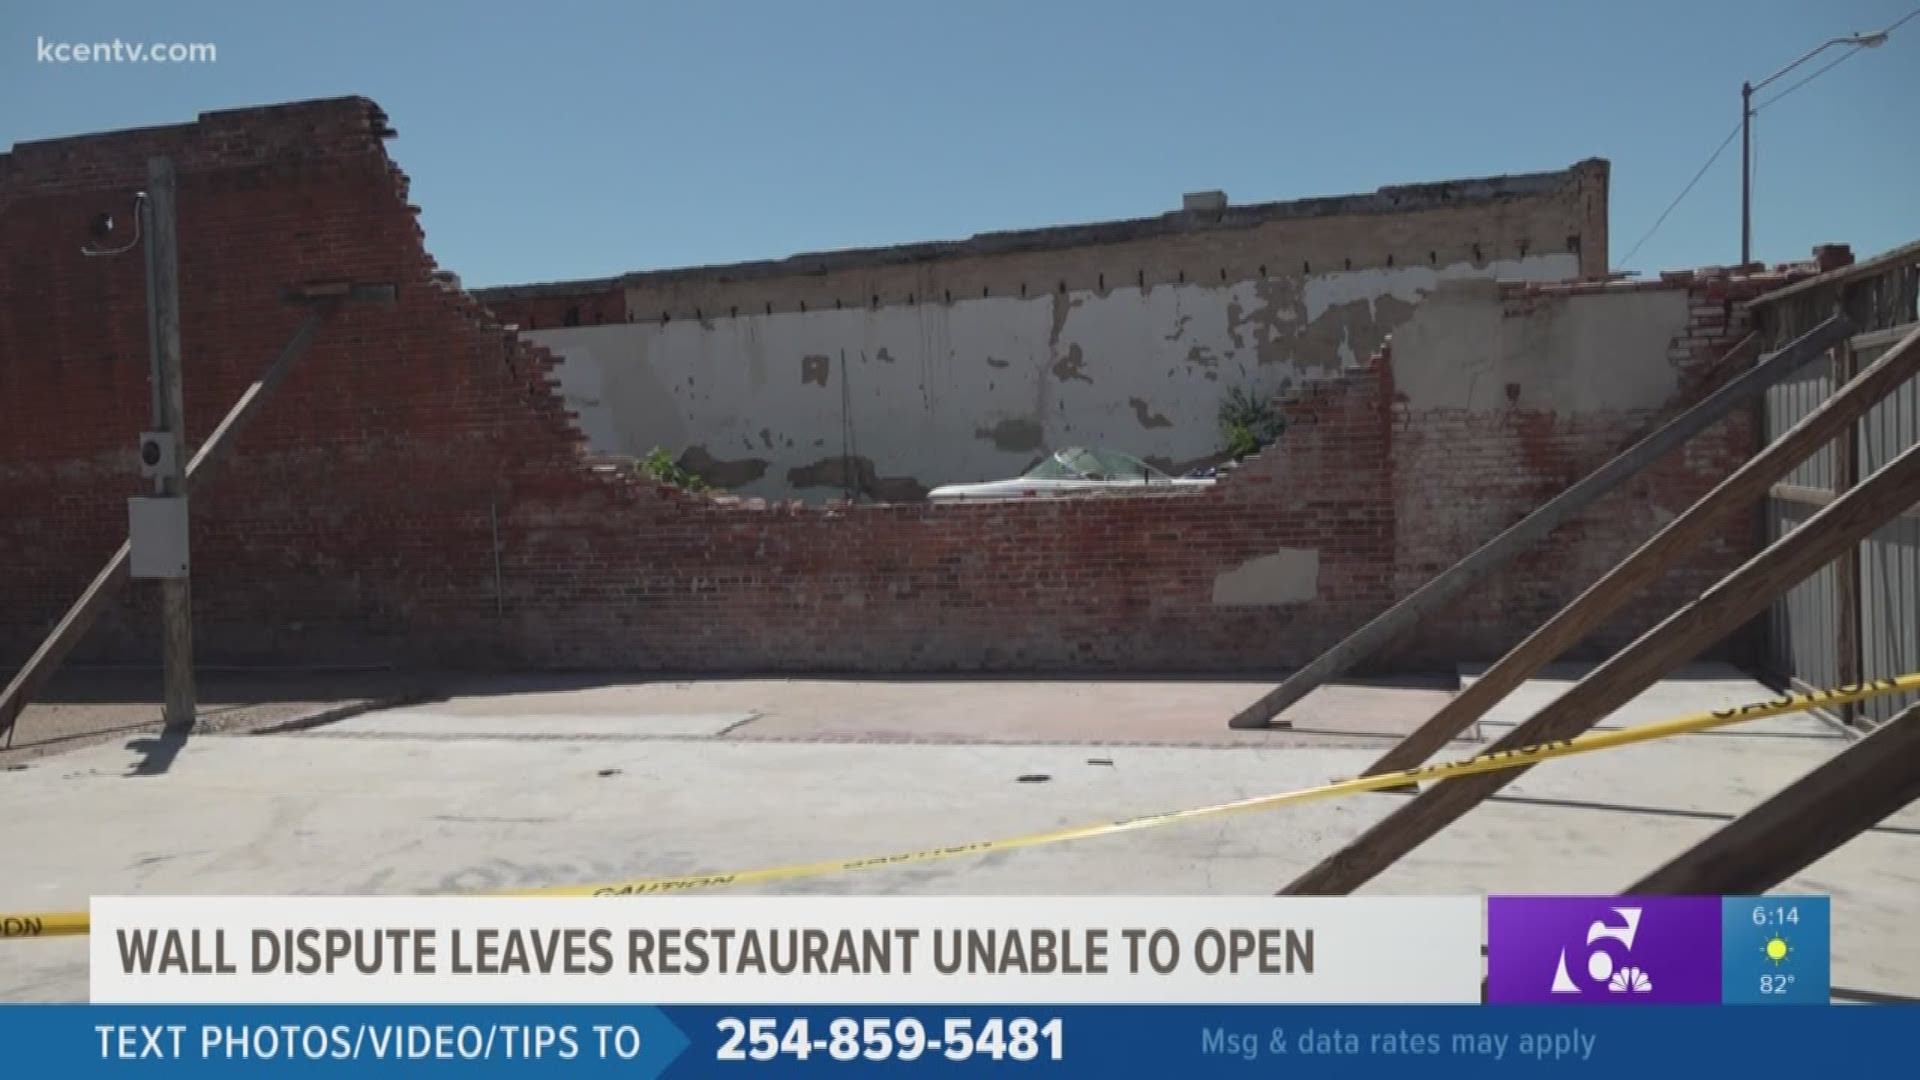 With restaurant dine-in restrictions lifting, one Central Texas business owner is still unable to open due to a wall on the verge of falling and a neighbor dispute.